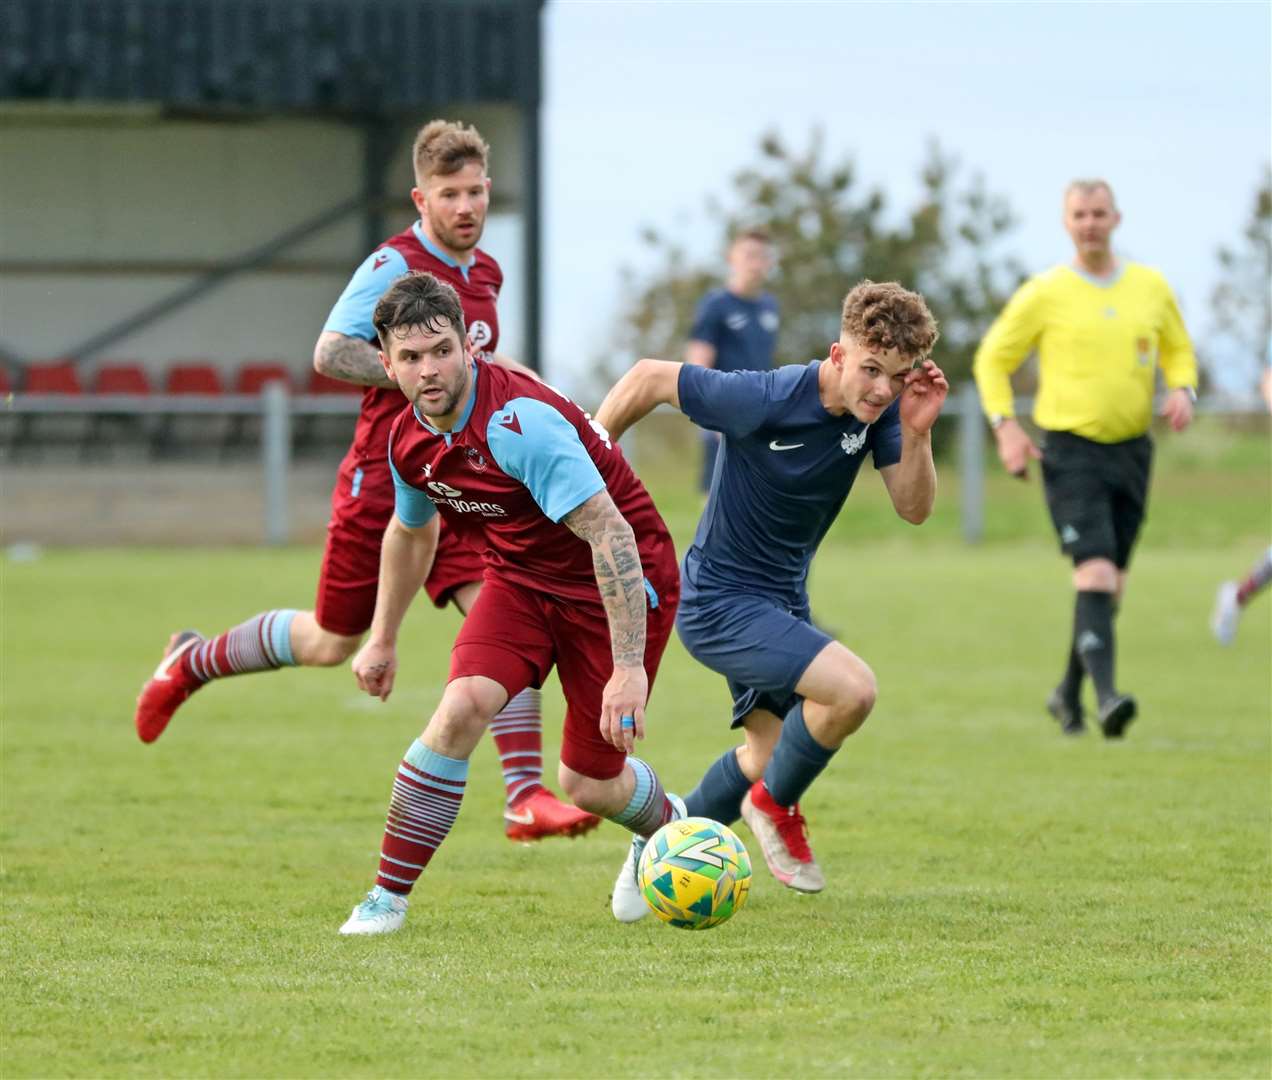 Sam Mackay (left) scored twice for Pentland United in their 3-3 draw with High Ormlie Hotspur. Picture: James Gunn